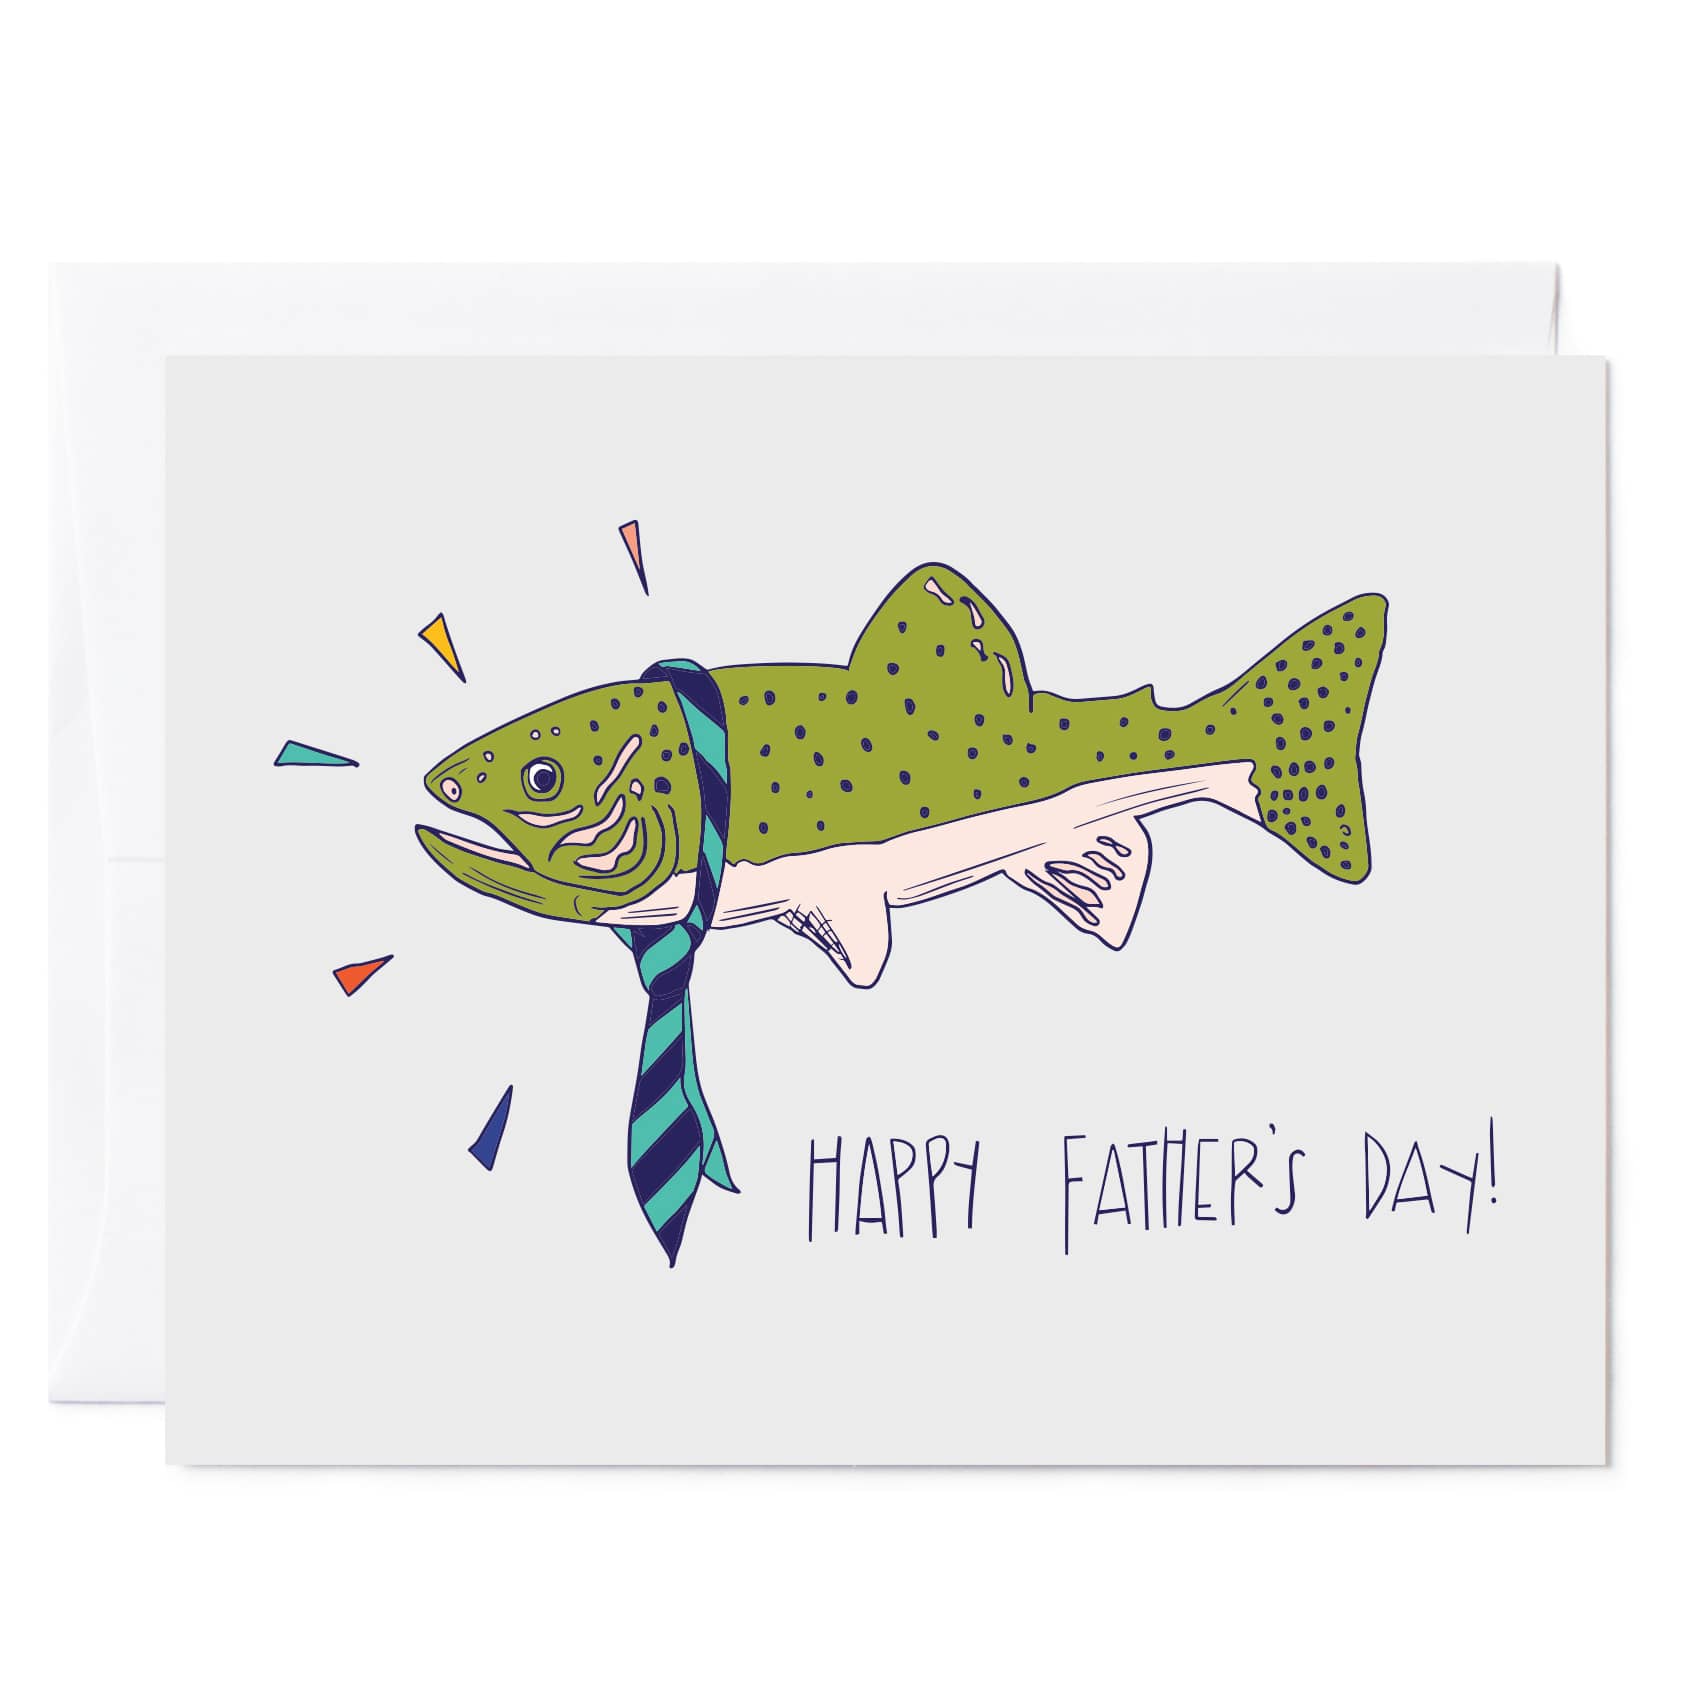 Illustrated Father's Day Fish in Striped Tie Greeting Card